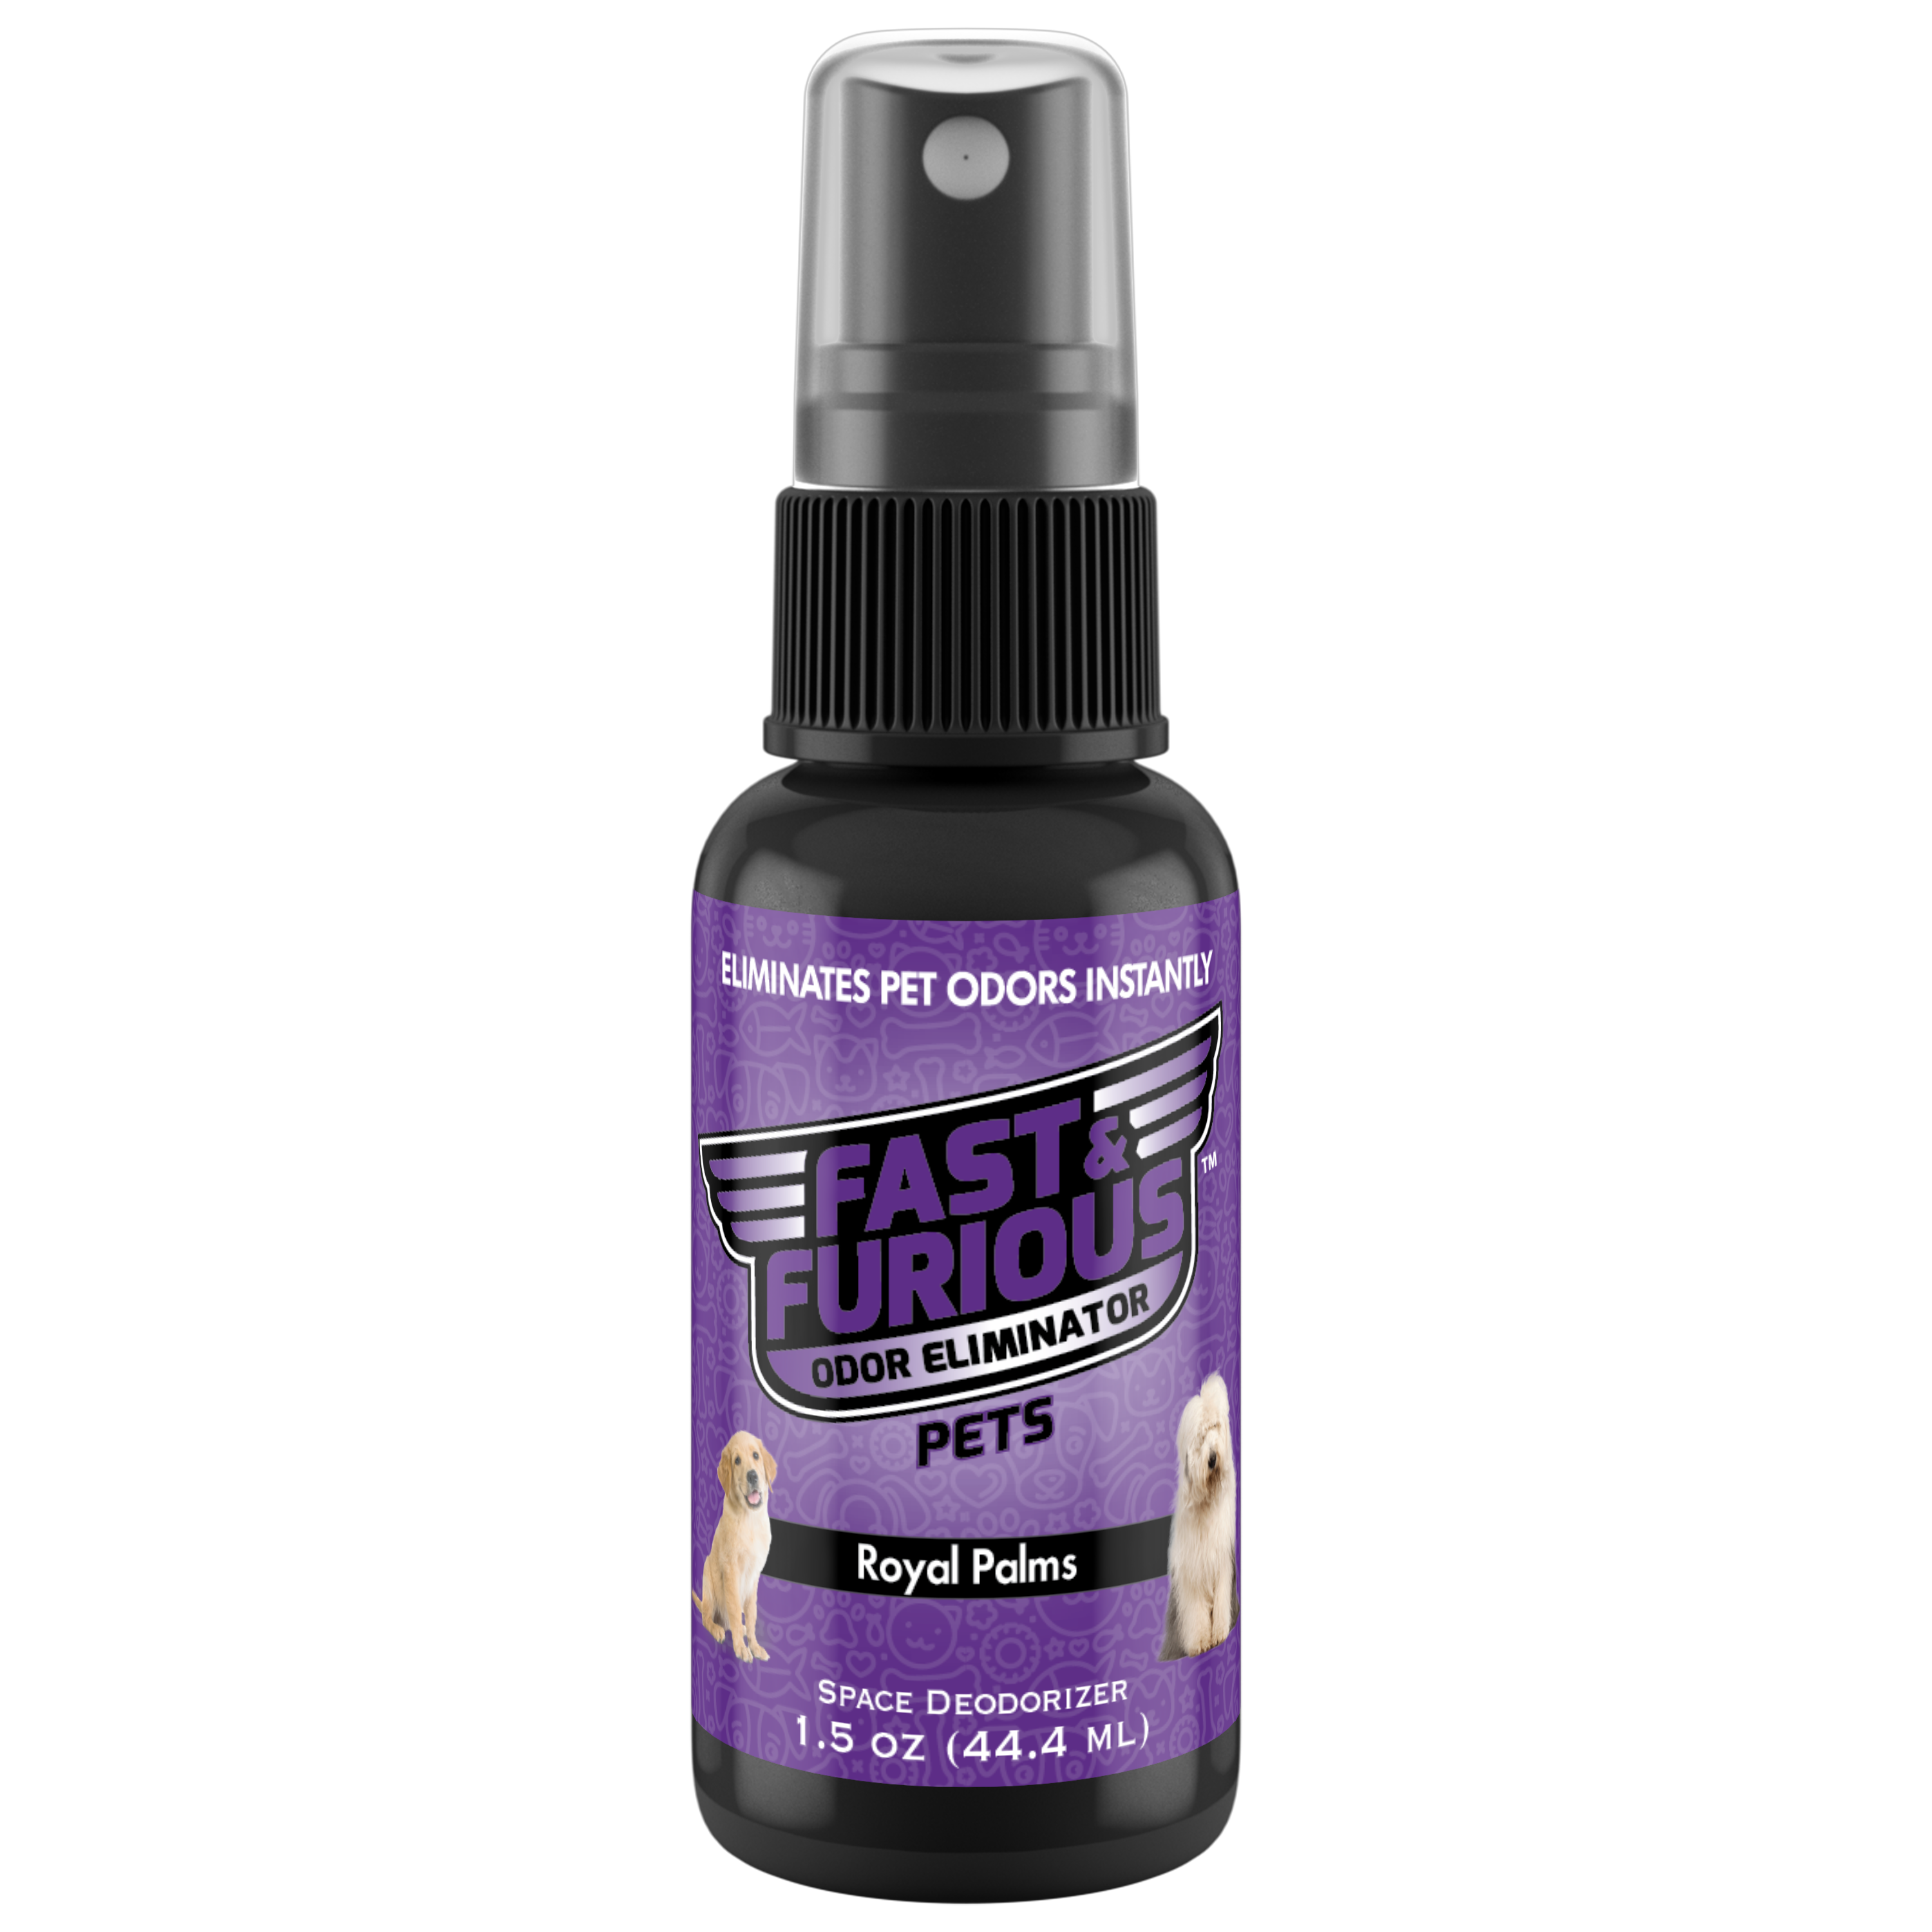 Fast and Furious Pets Odor Eliminator - Royal Palms Scent